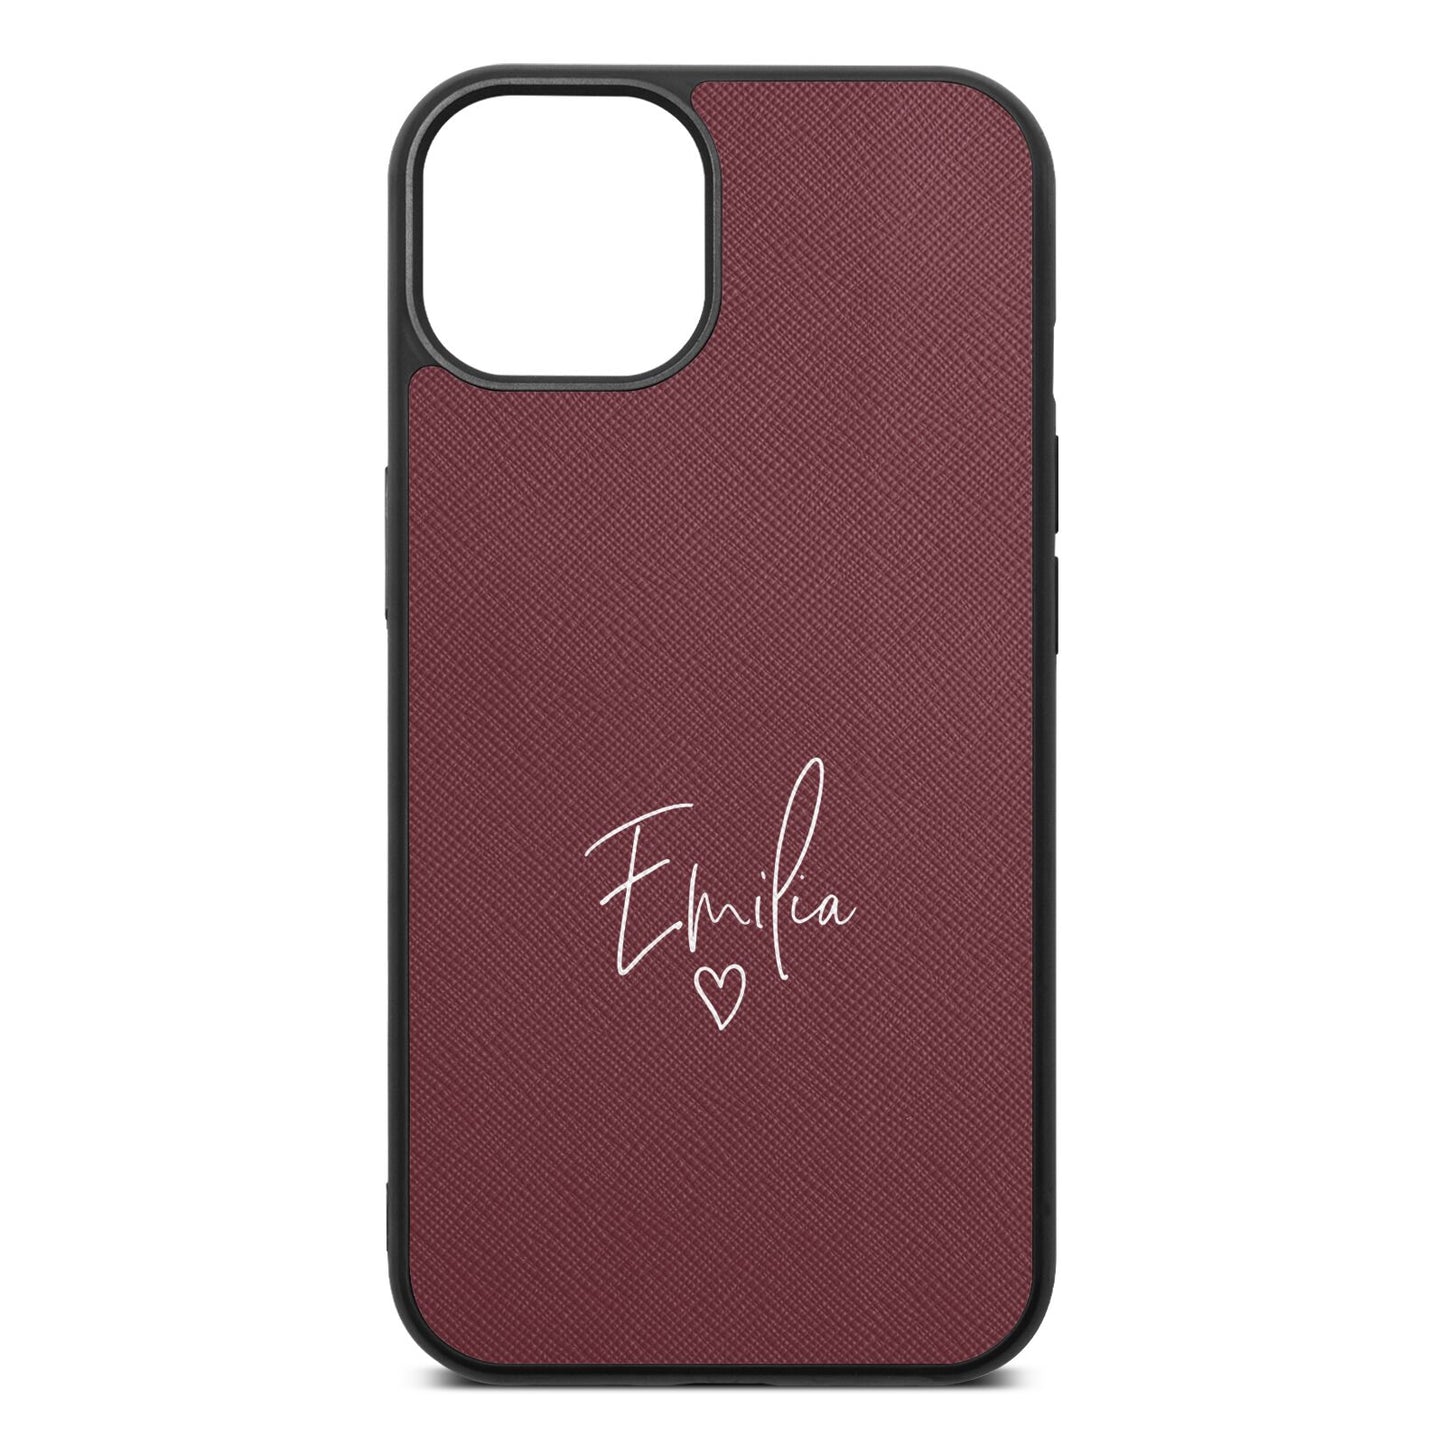 White Handwritten Name Transparent Rose Brown Saffiano Leather iPhone 13 Case